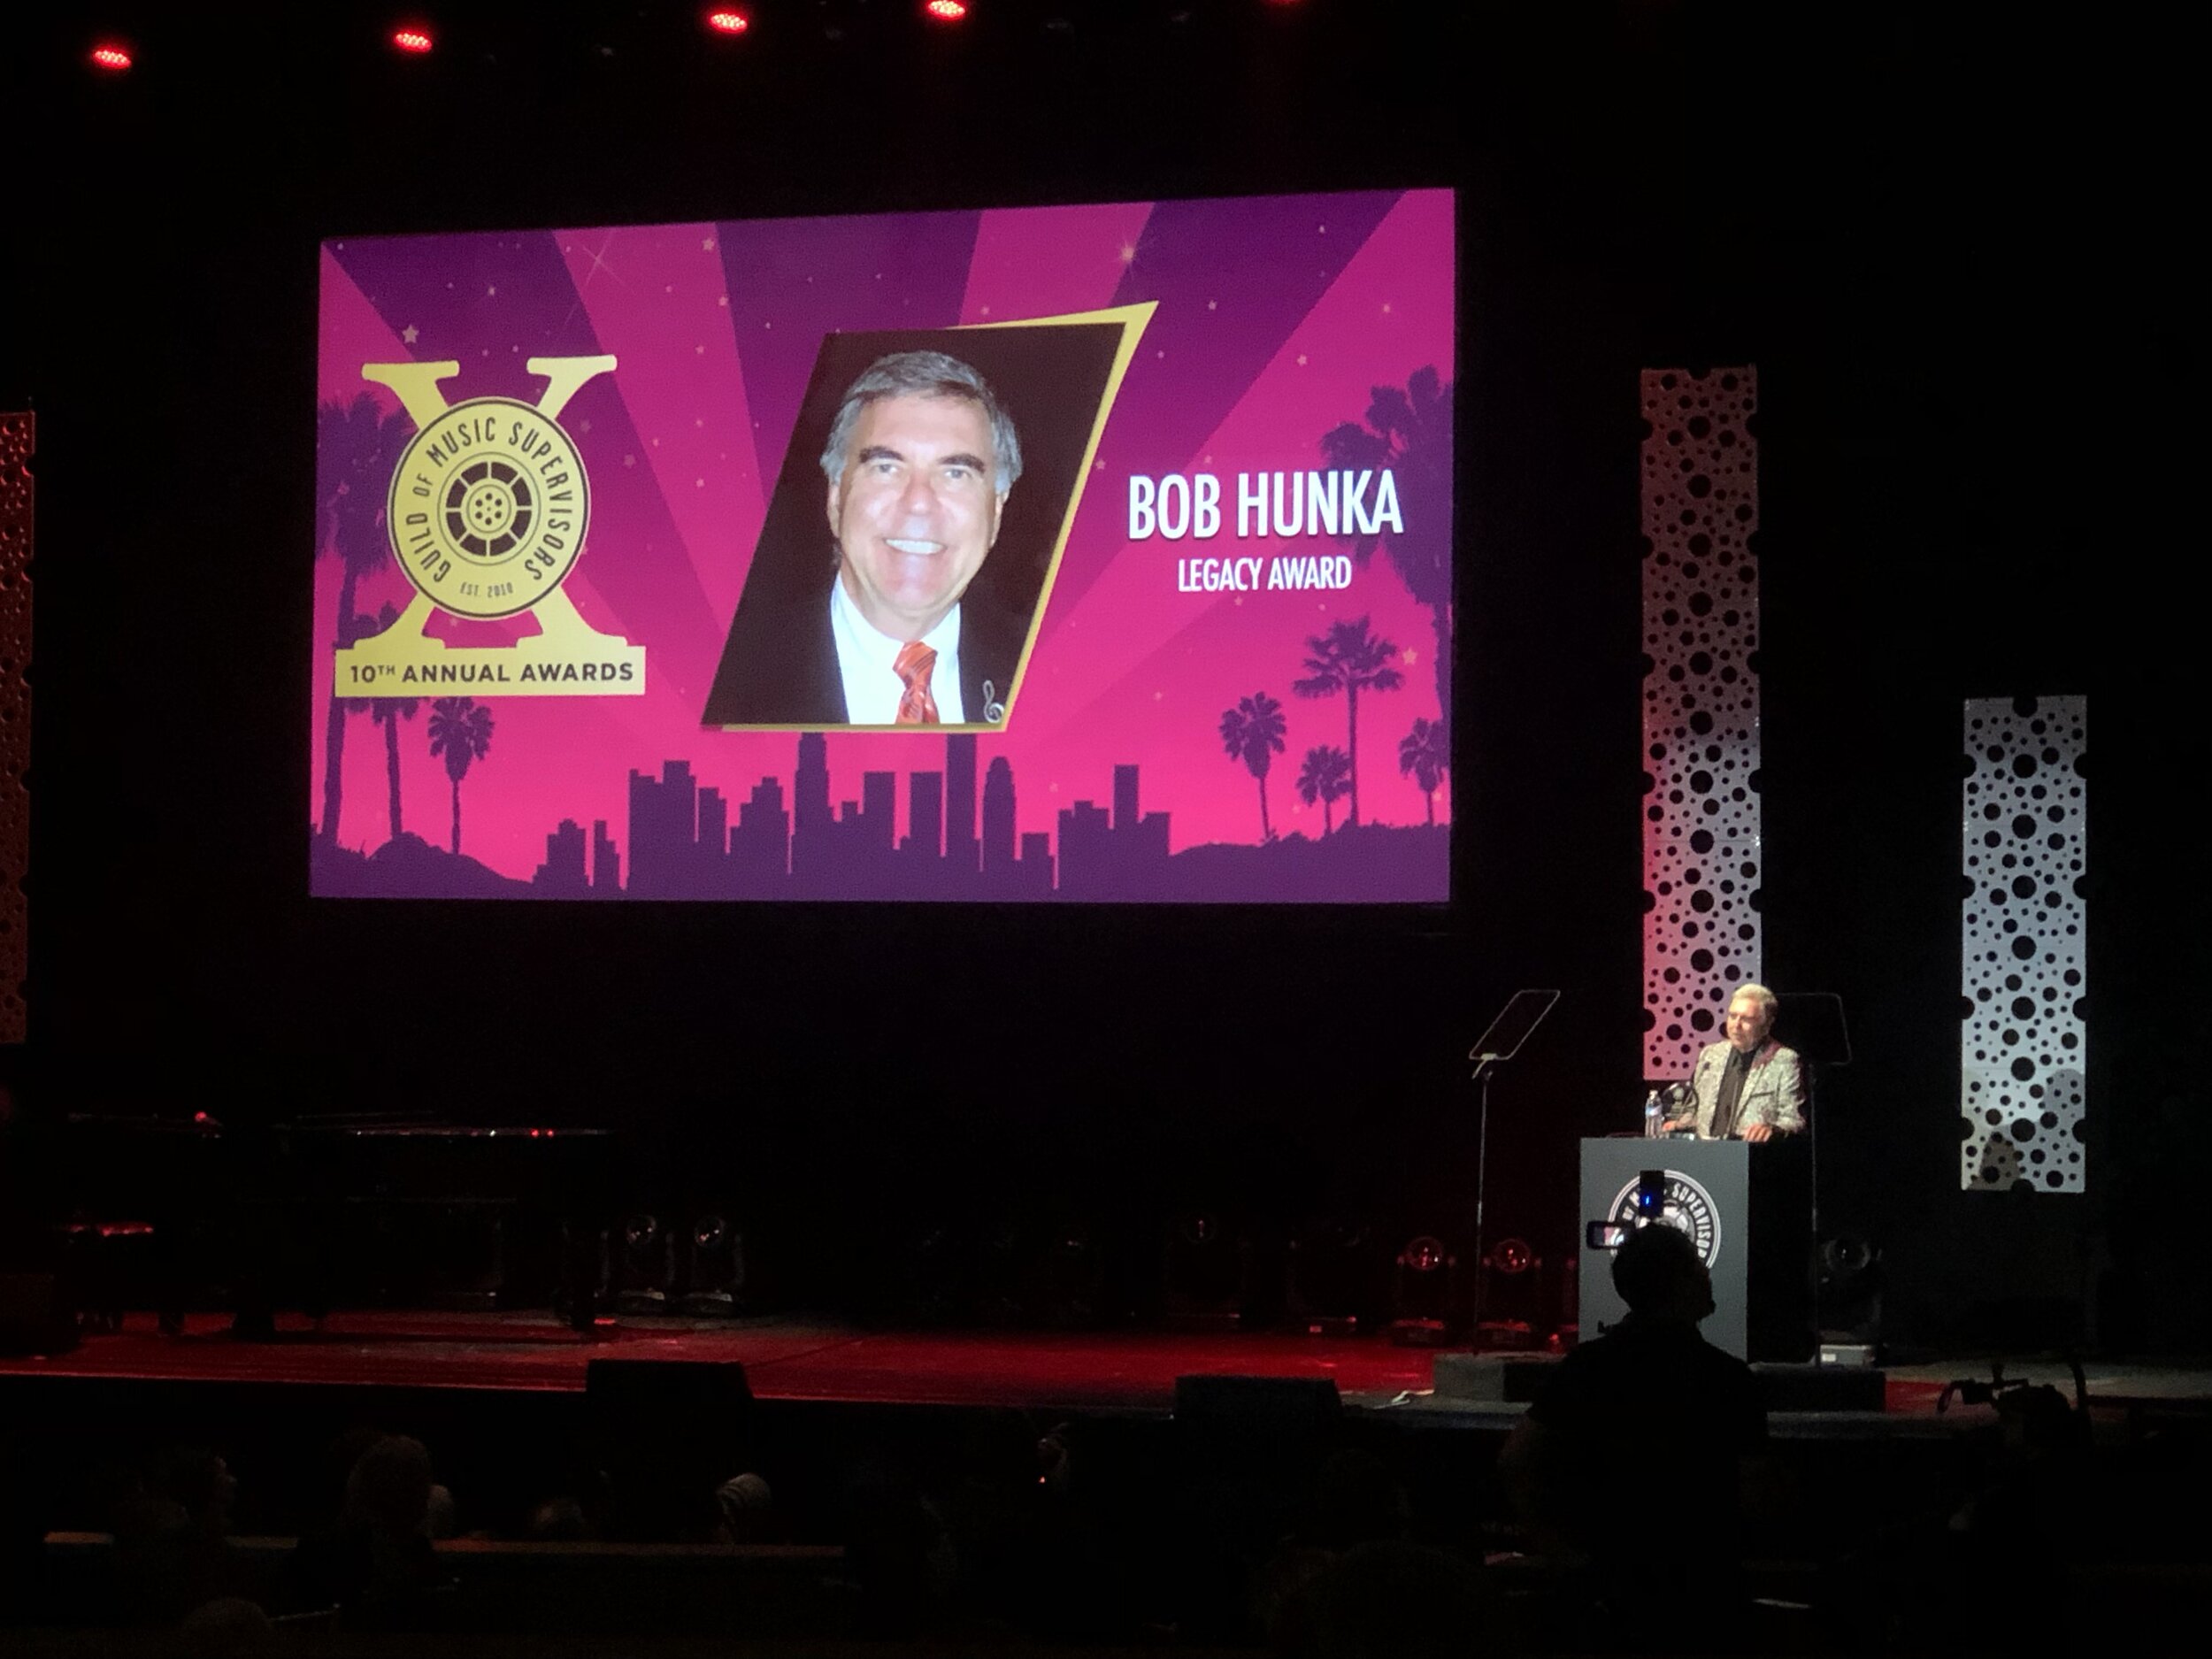  Industry legend Bob Hunka was honored with the Legacy Award 